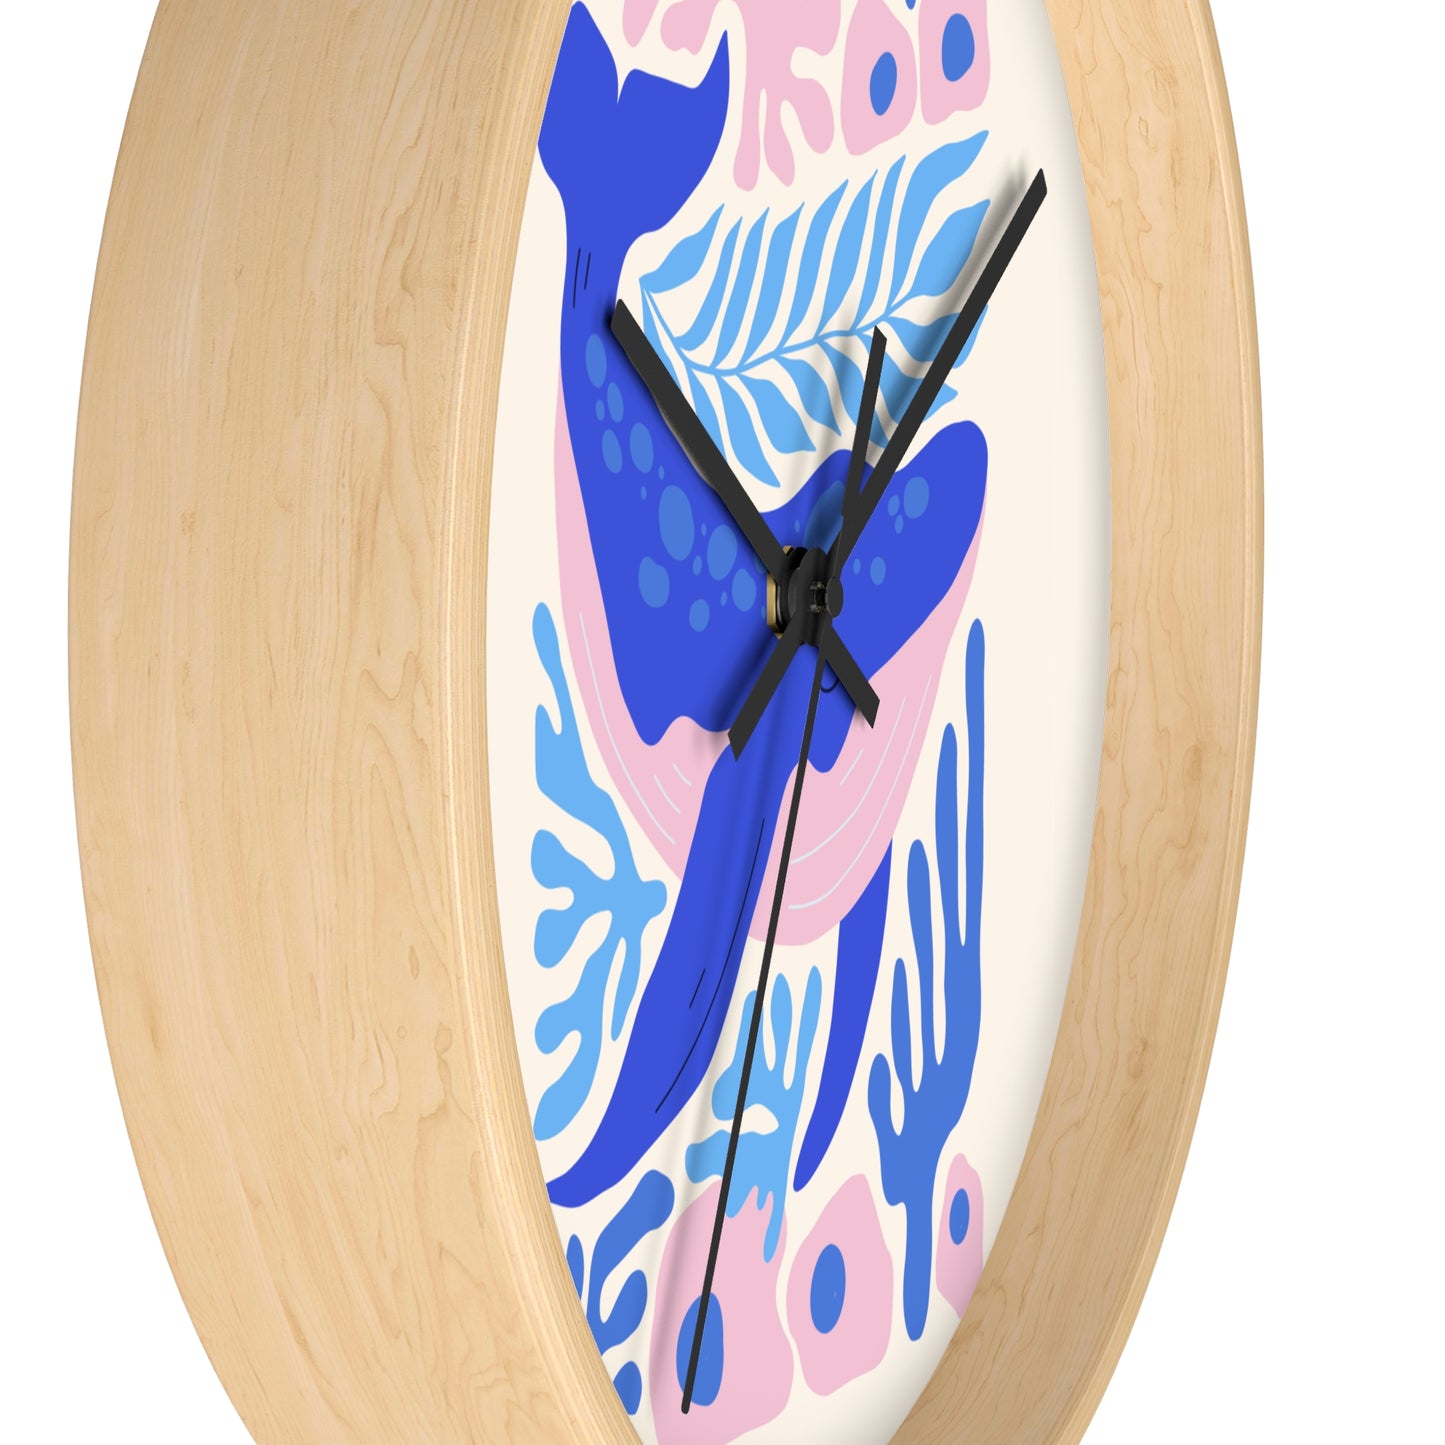 Blue Whale Coral Expedition Wall Clock